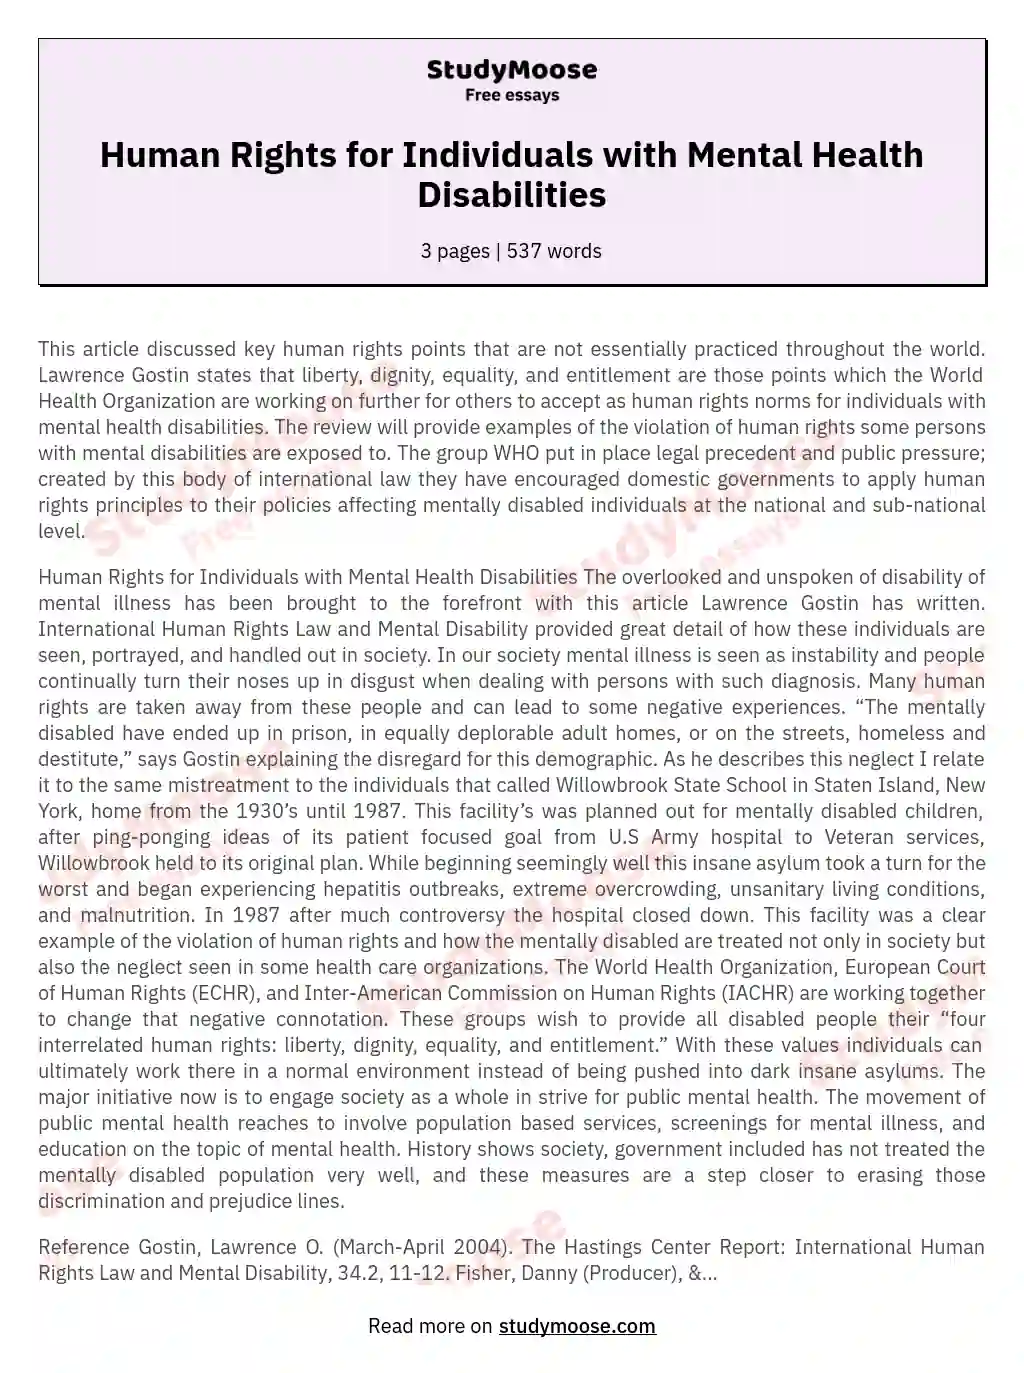 Human Rights for Individuals with Mental Health Disabilities